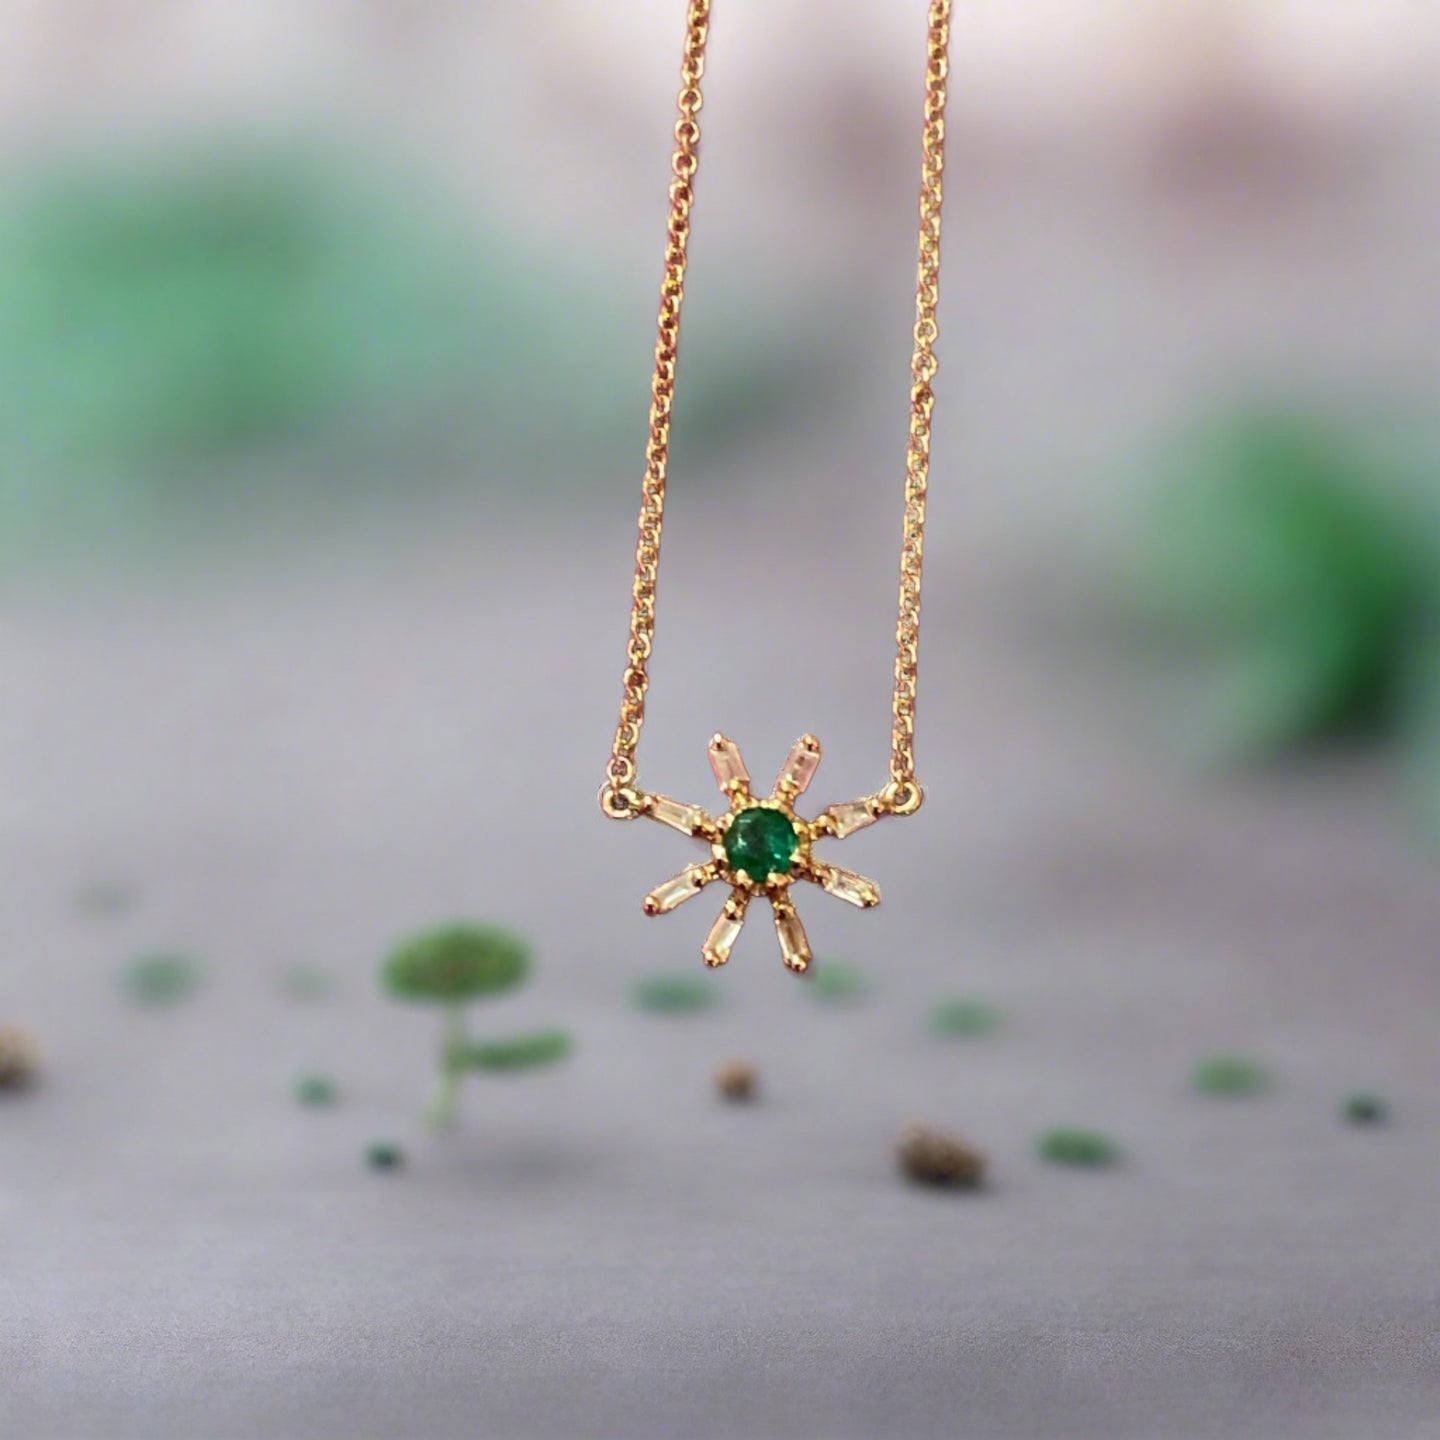 Liven Co. Sunshine Necklace with Baguette Diamonds and Emerald Center